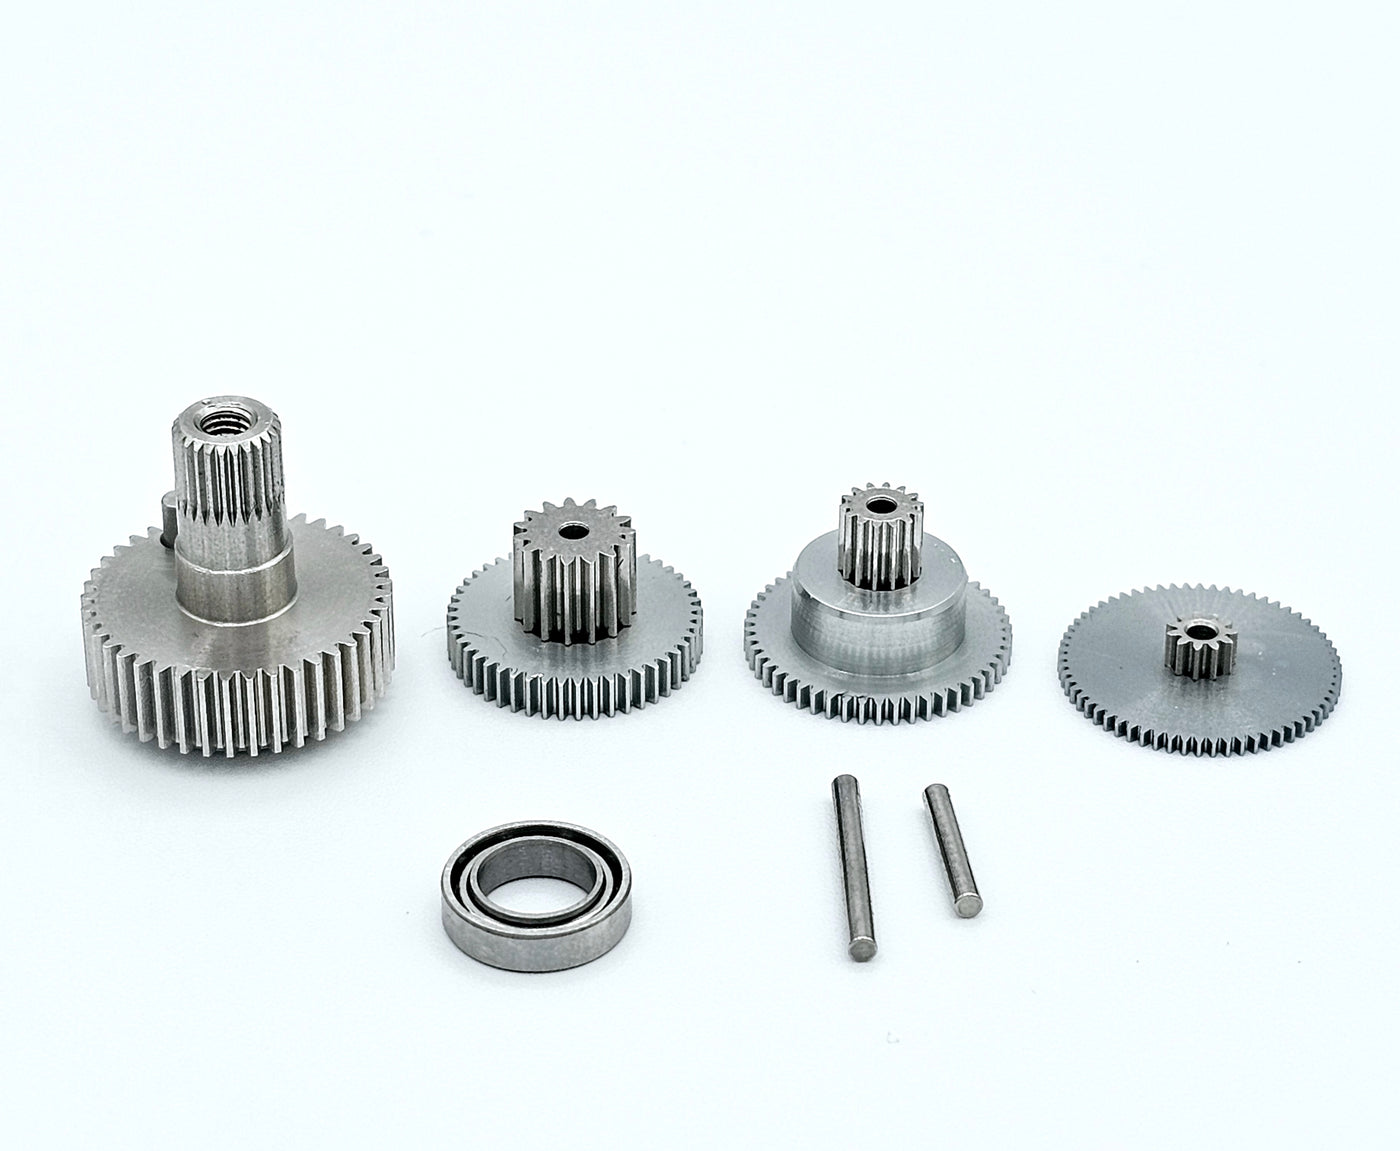 RS450 Servo Replacement Gear Set